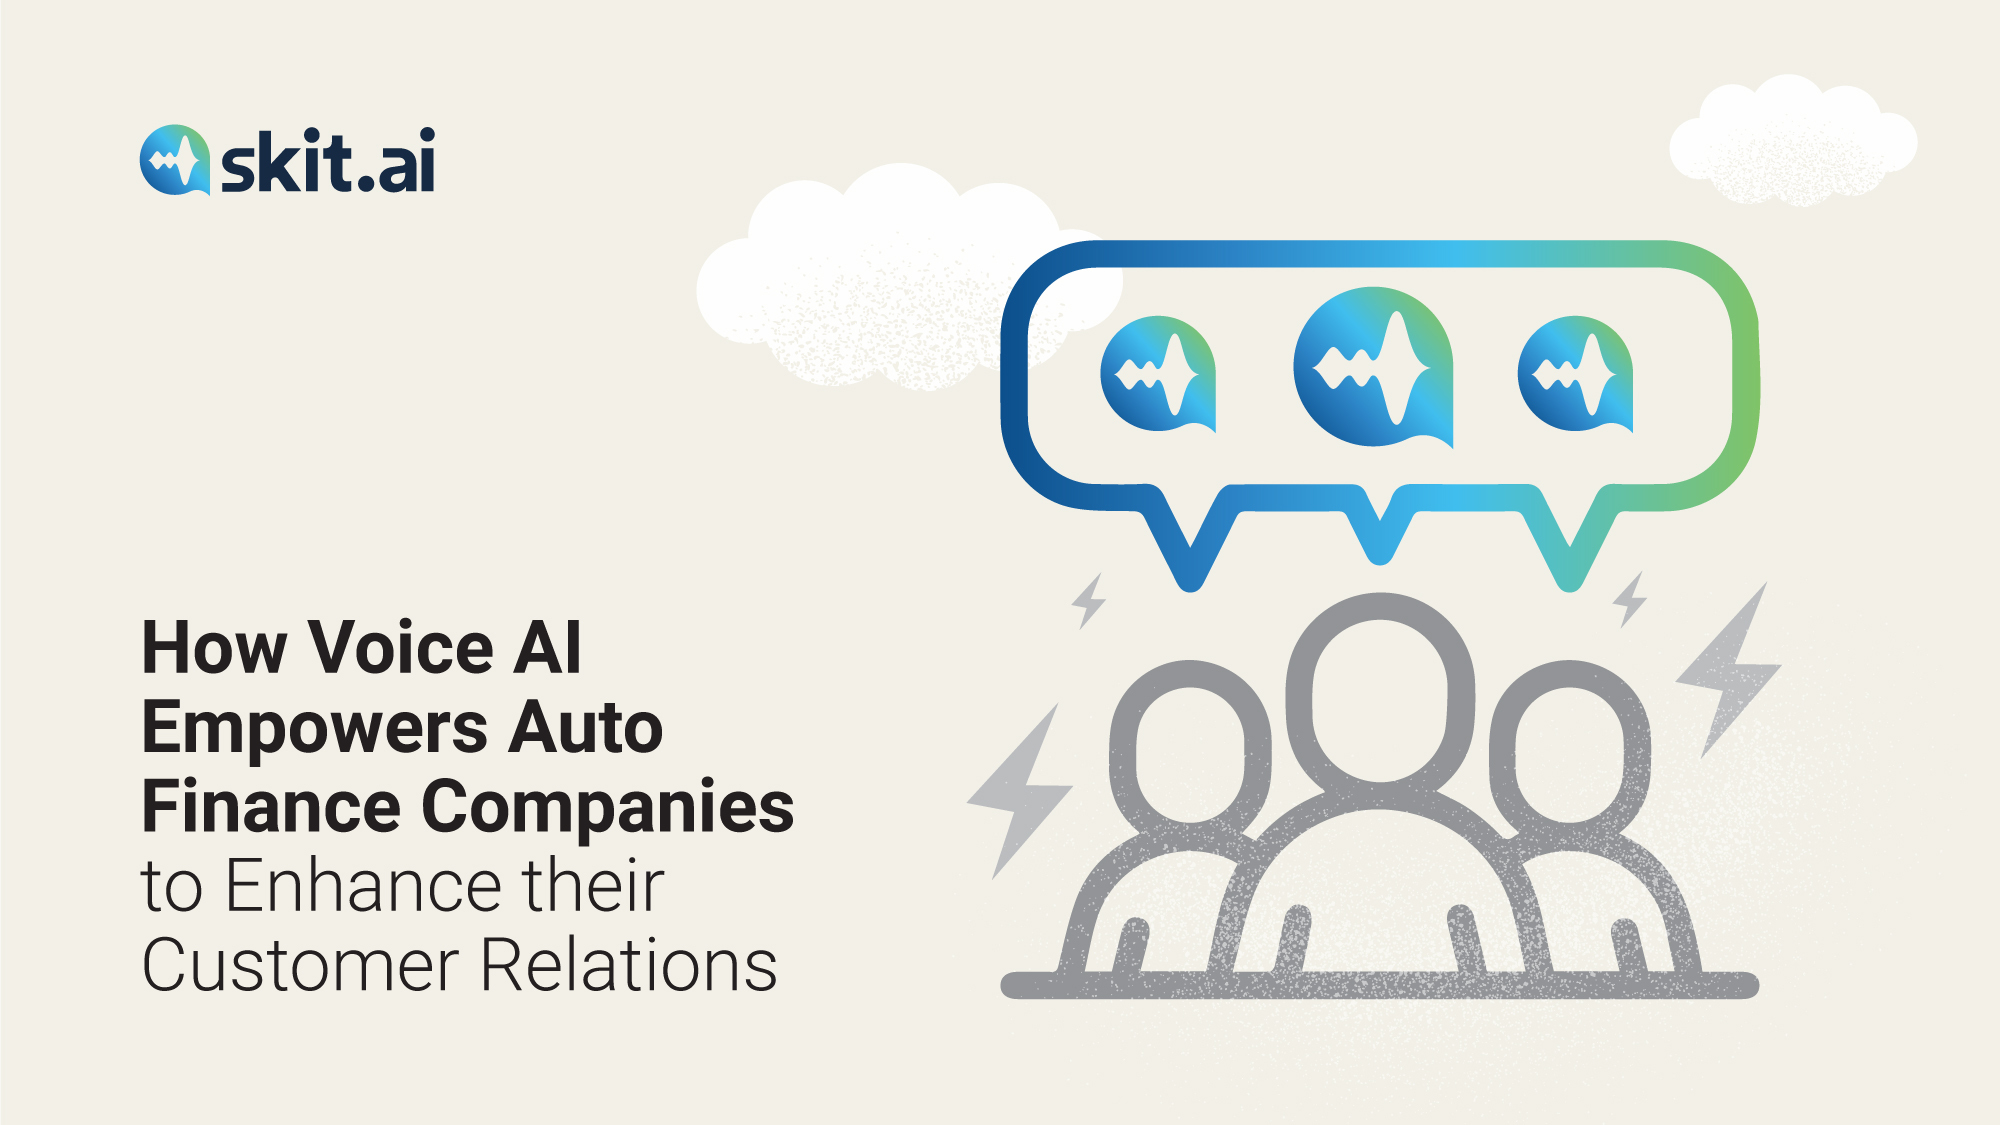 Voice AI Helps Auto Financers Reboot for Better Customer Loyalty and Retention